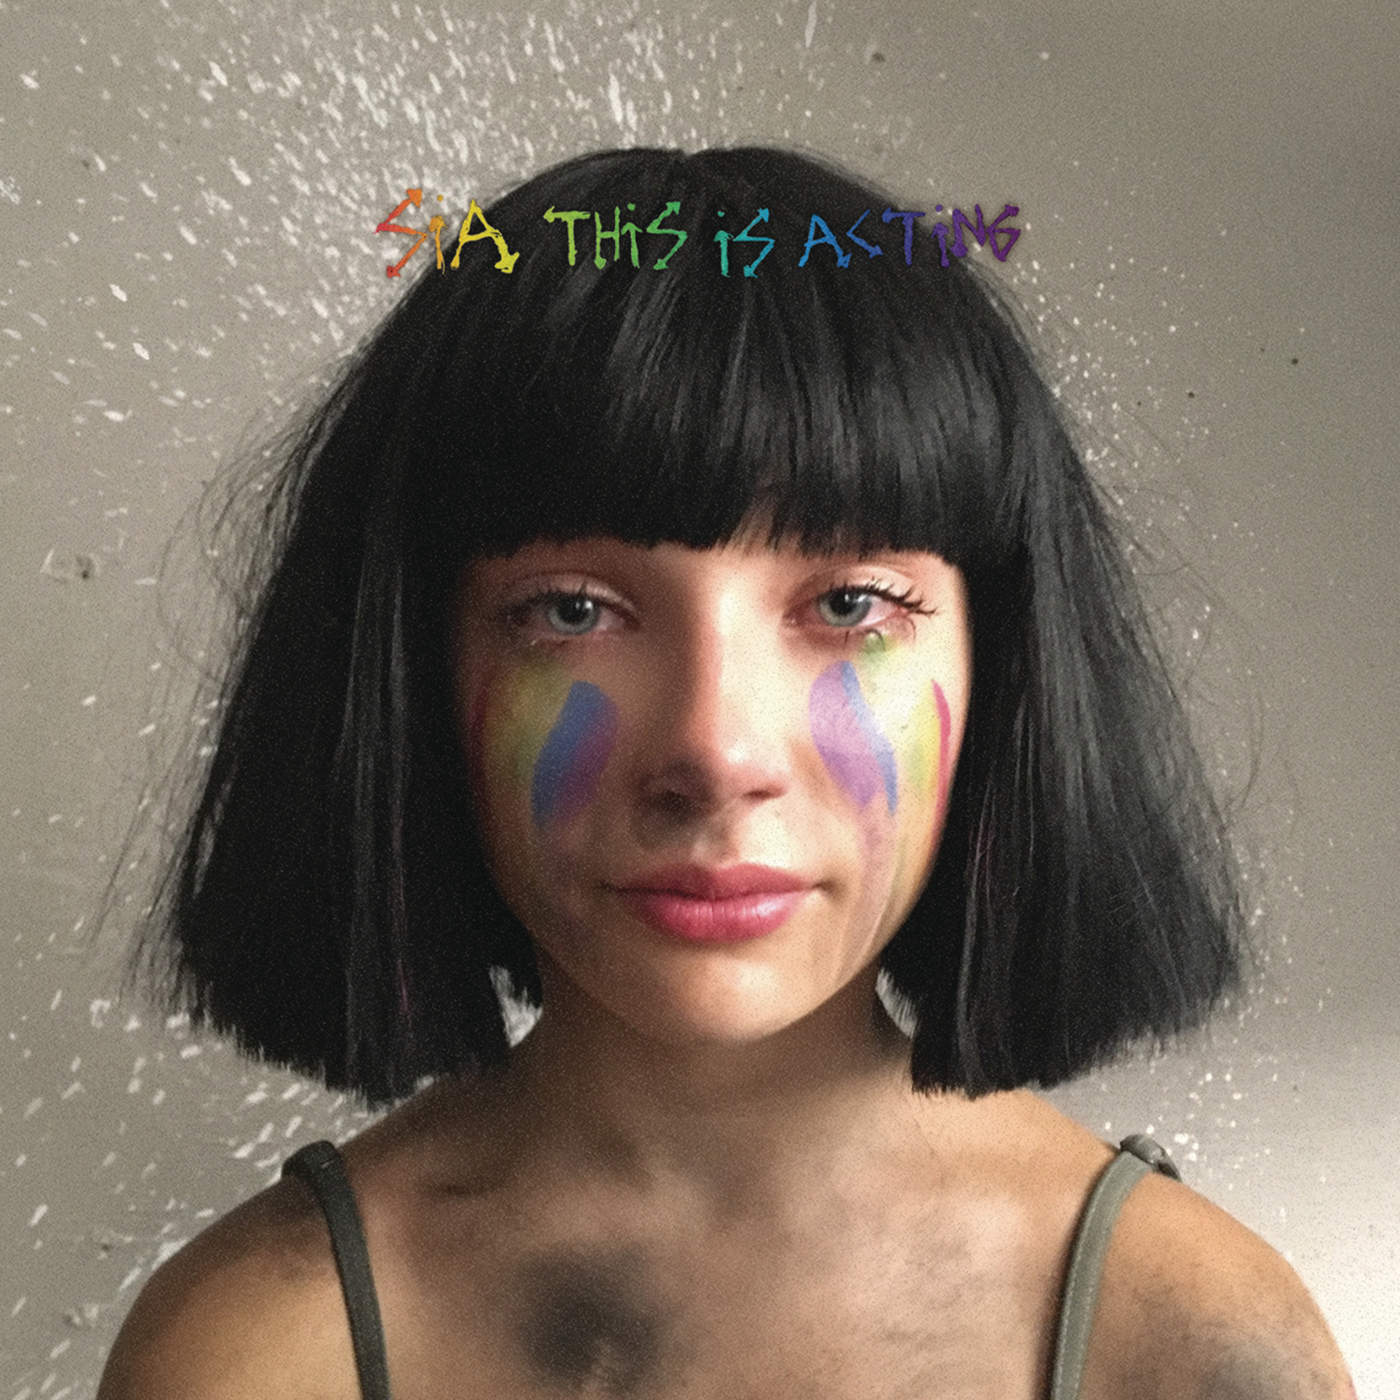 Sia - This Is Acting (Deluxe Edition) [Mastered for iTunes] (2016) - Album [iTunes Plus AAC M4A]